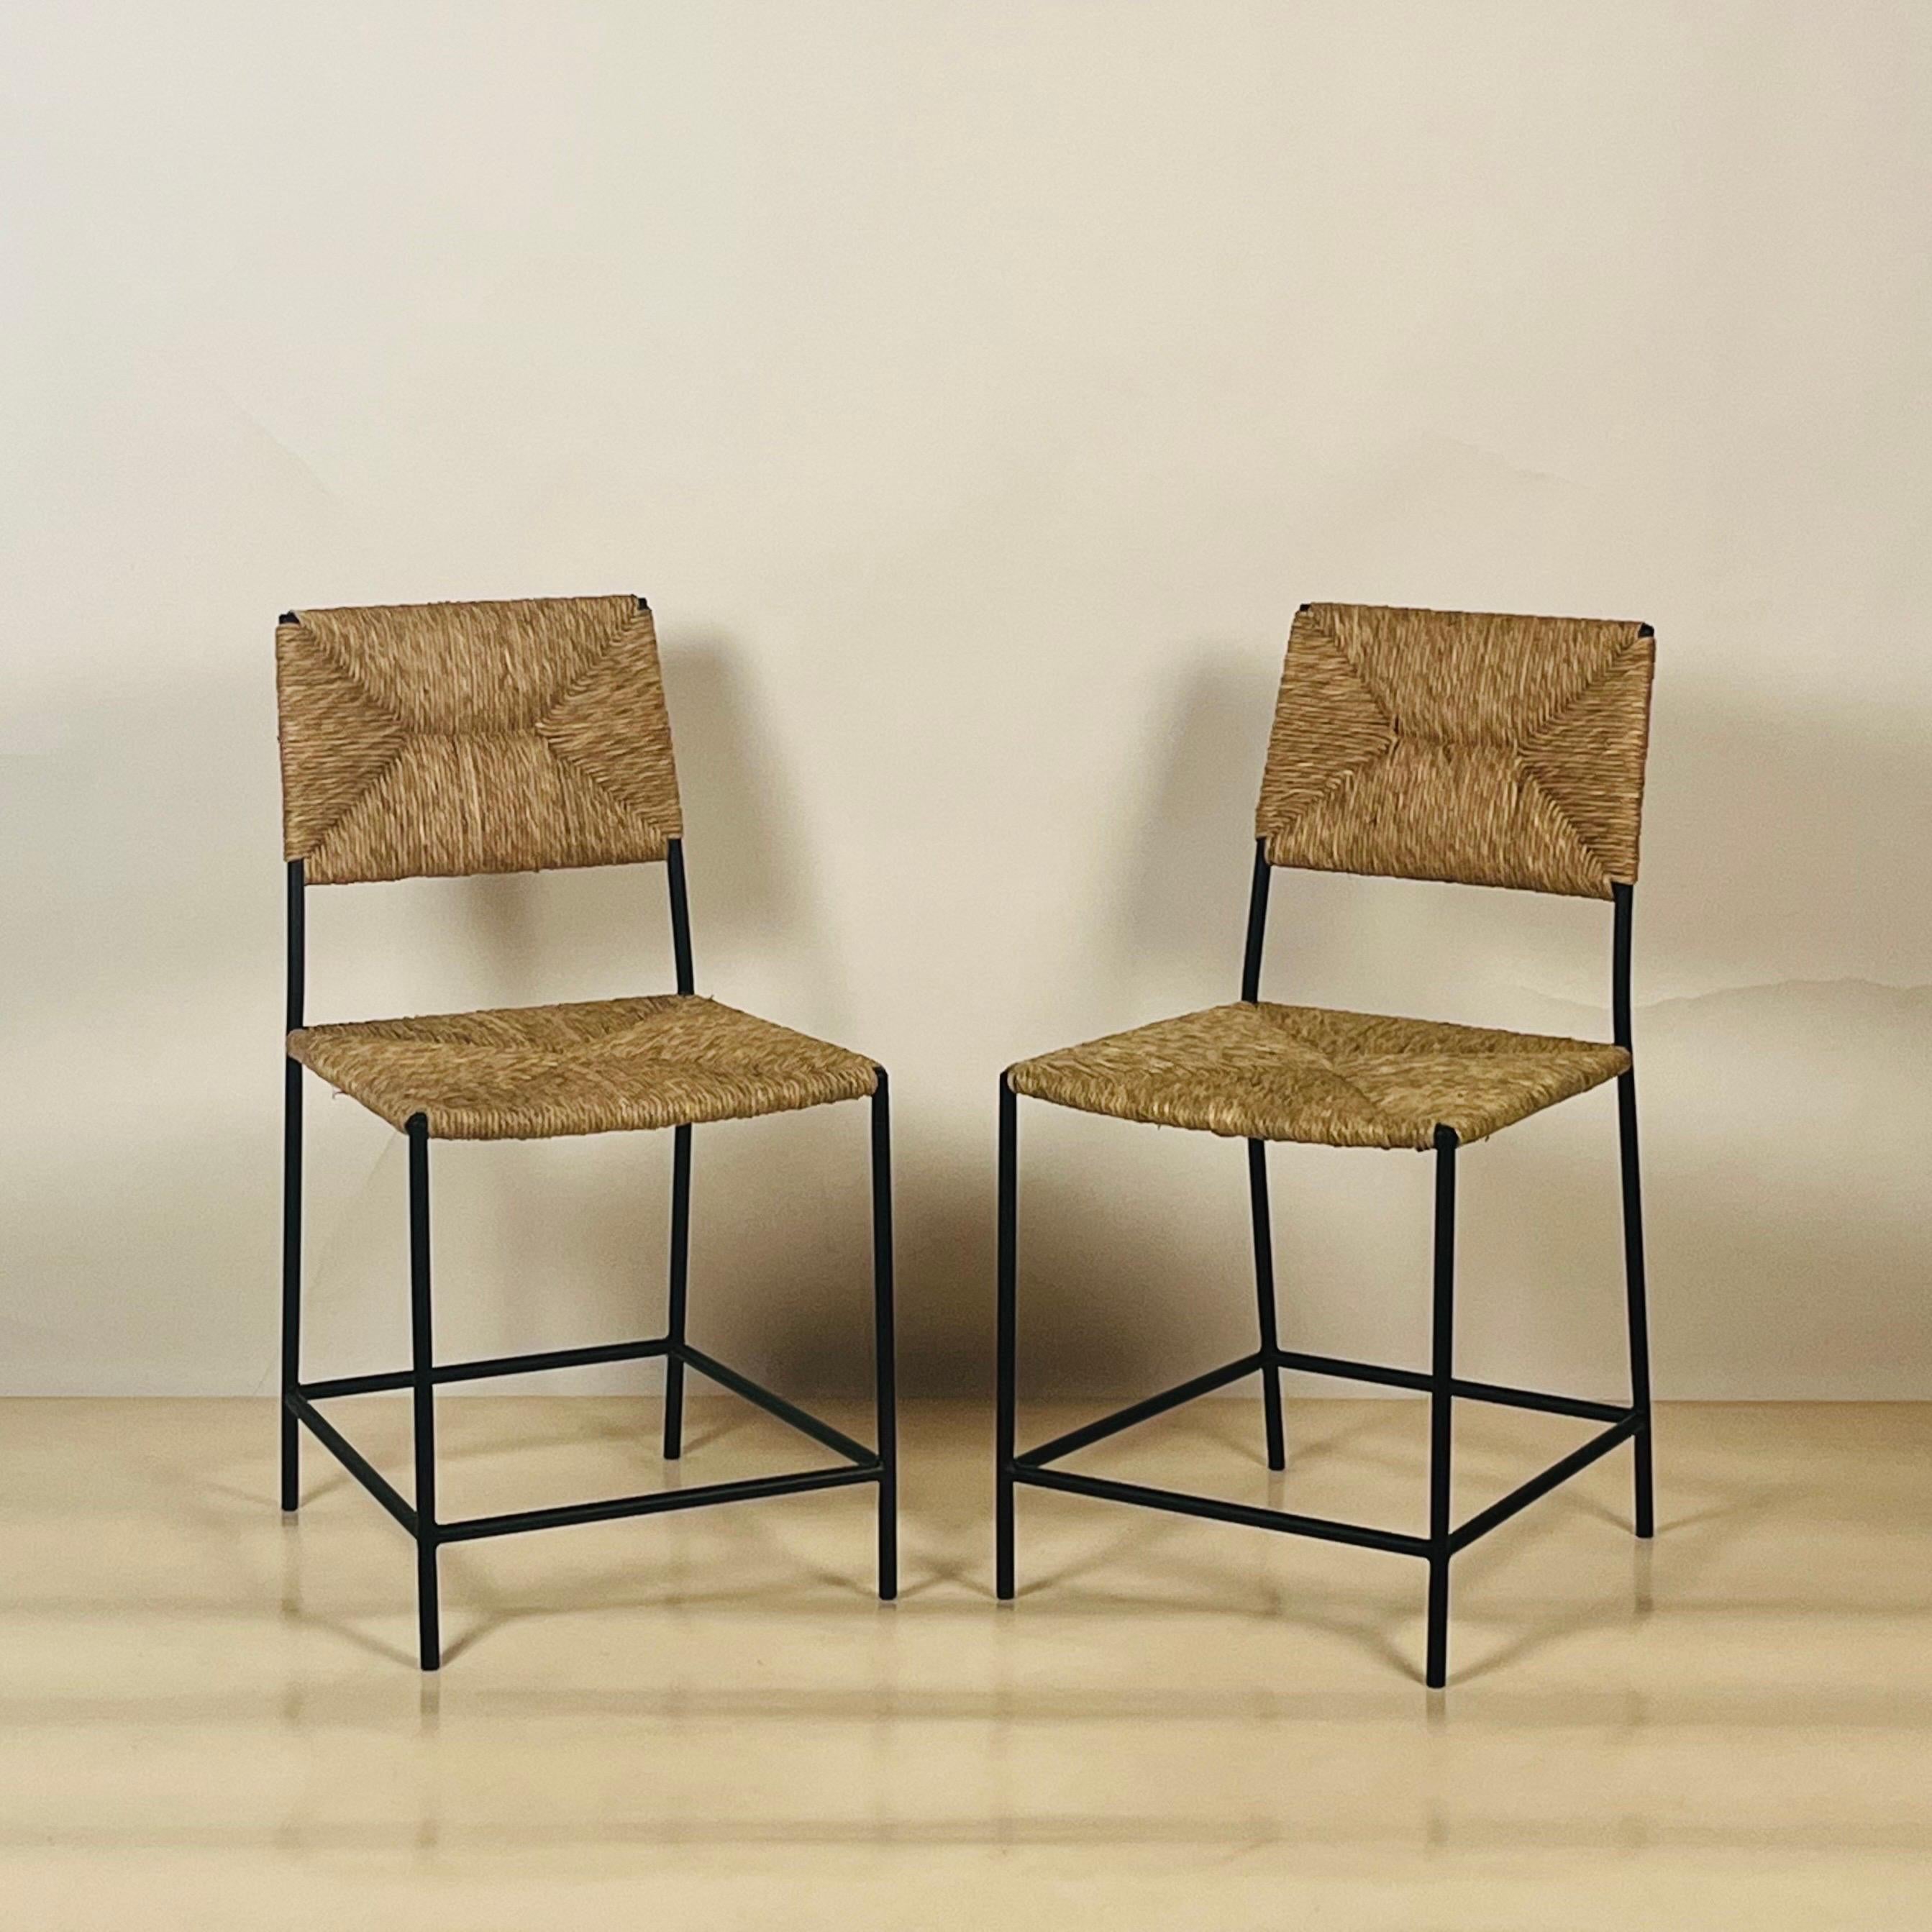 Set of 8 'Campagne' Dining Chairs by Design Frères.

18 1/2 seat height. Discrete non-scratch gliders on the tips of the legs (picture before last).

Sturdy and comfortable. Chic and understated.